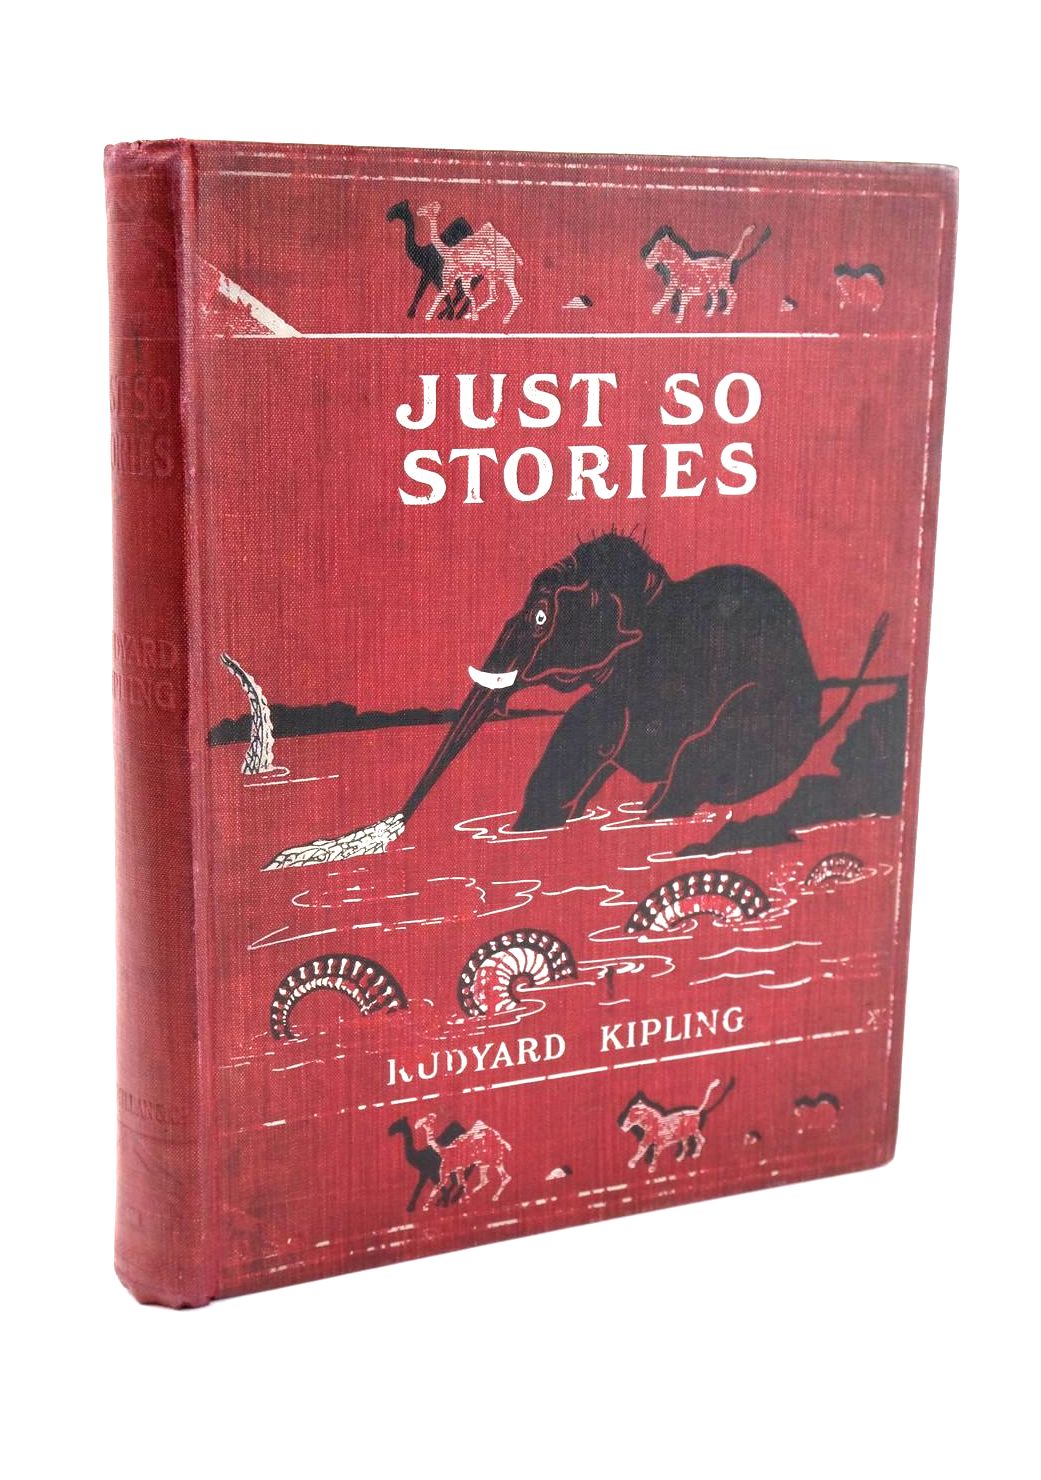 Photo of JUST SO STORIES written by Kipling, Rudyard illustrated by Kipling, Rudyard published by Macmillan &amp; Co. Ltd. (STOCK CODE: 1324332)  for sale by Stella & Rose's Books